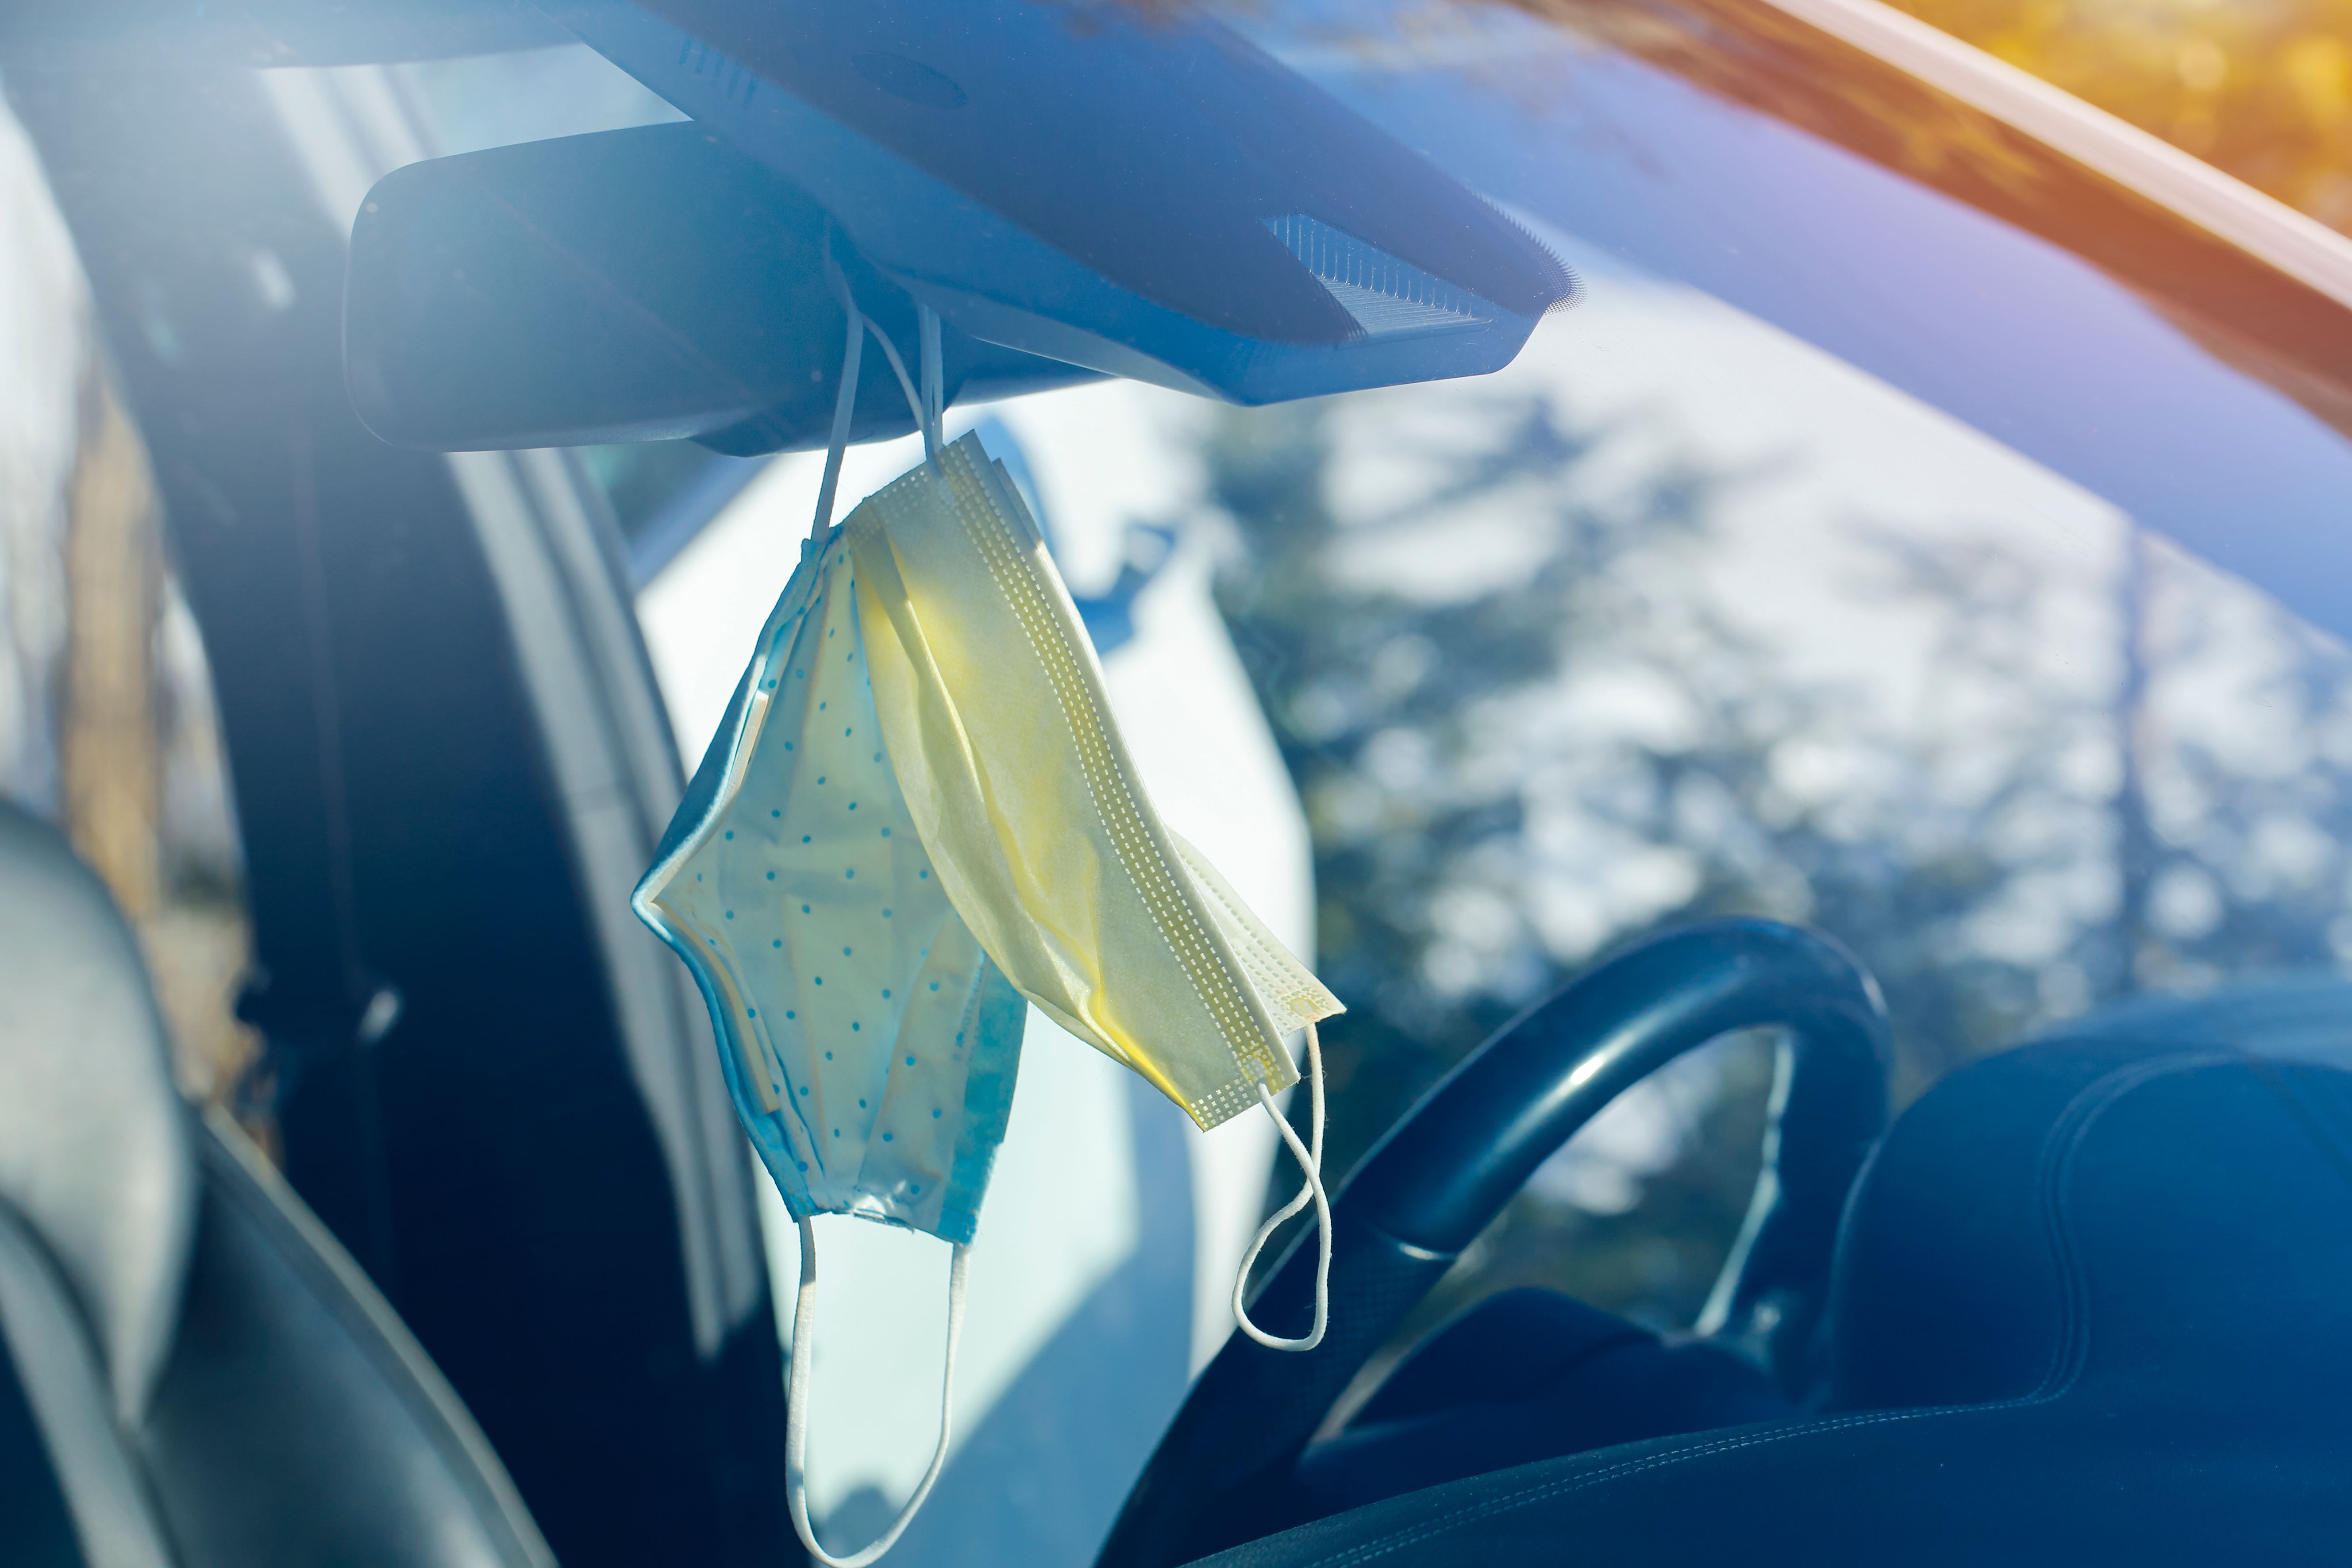 Hanging Things from Your Rearview Mirror Is Illegal